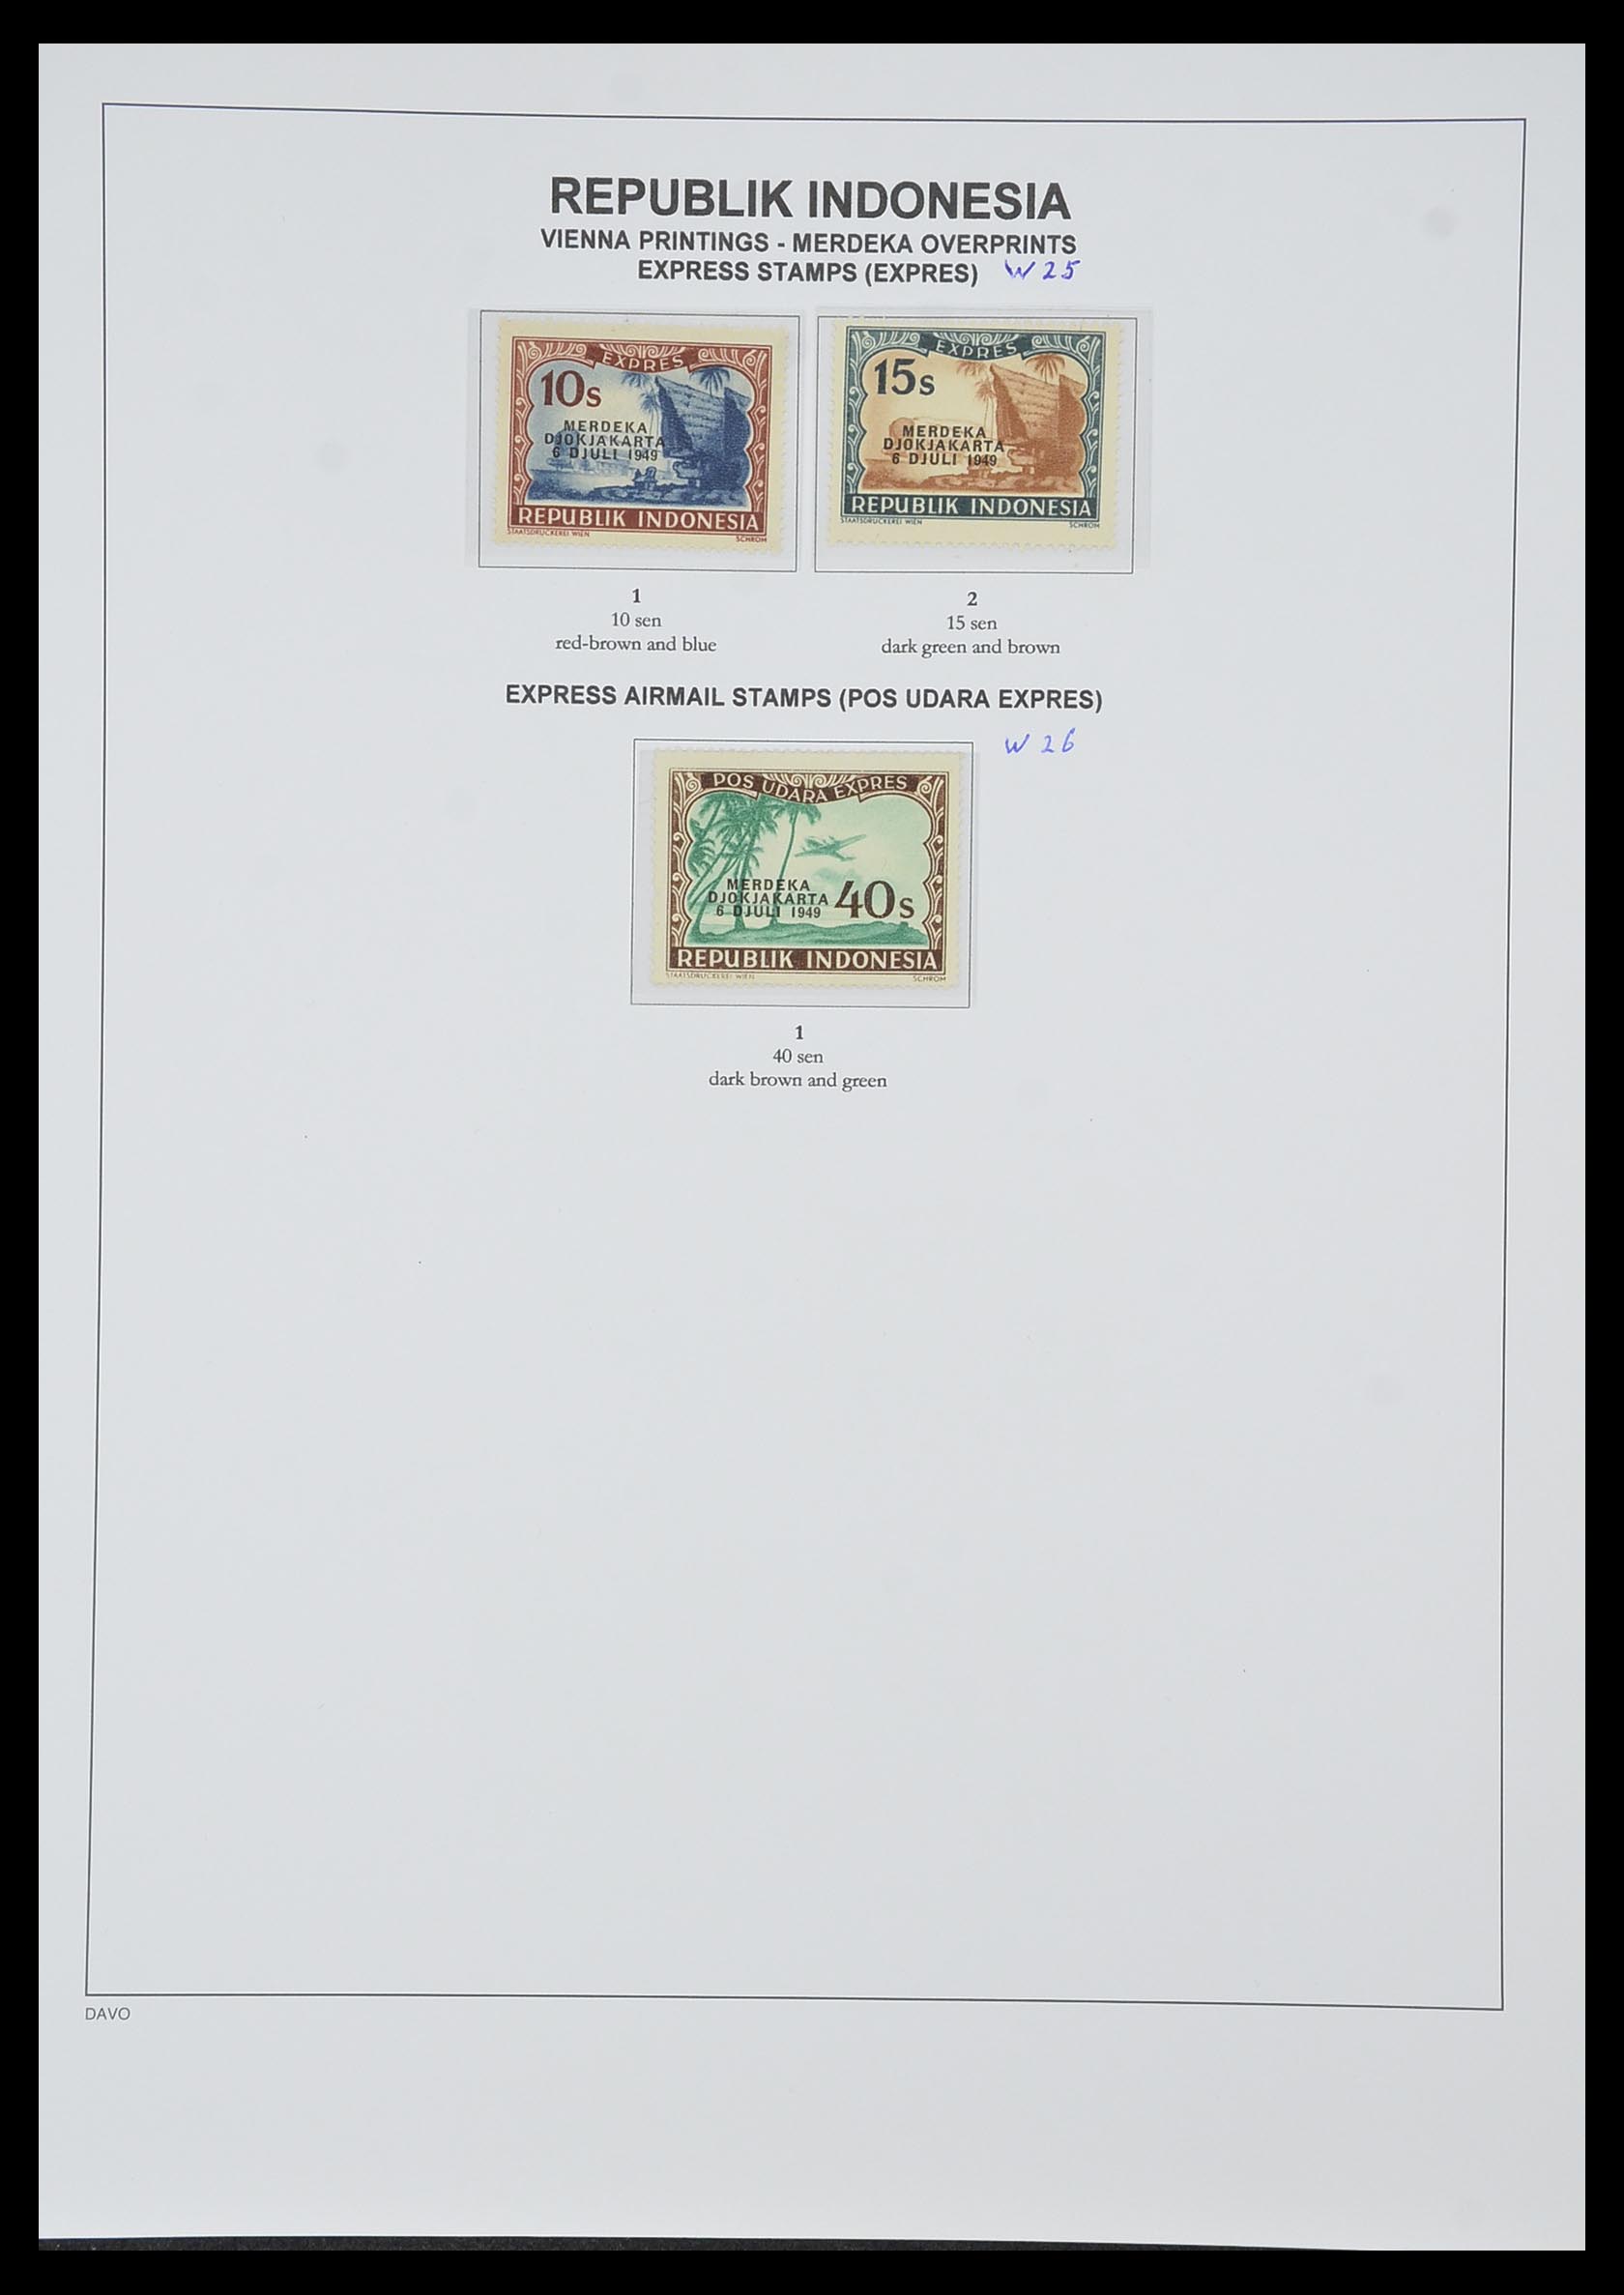 33988 040 - Stamp collection 33988 Vienna printings Indonesia.